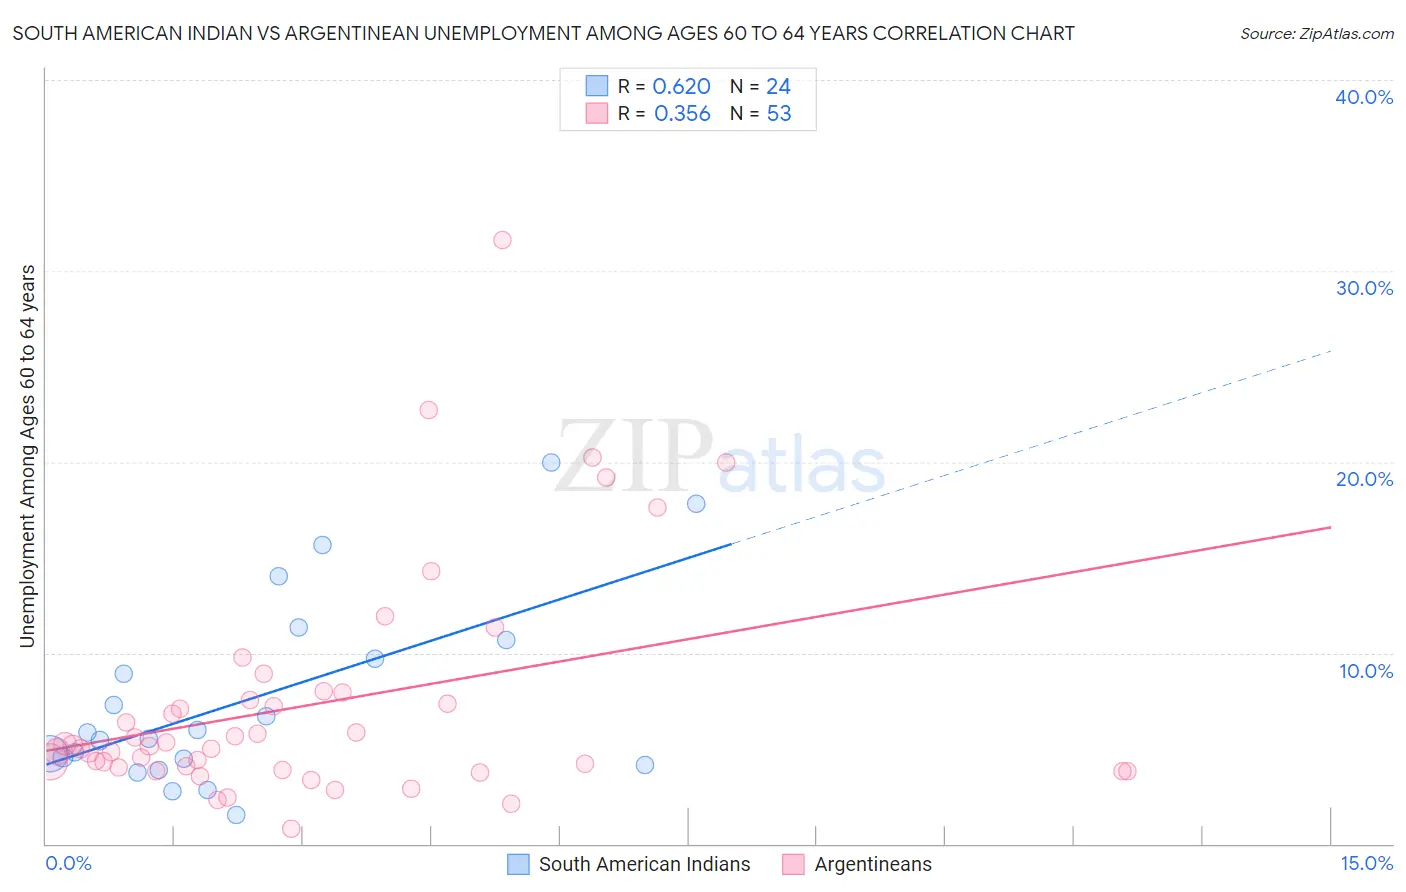 South American Indian vs Argentinean Unemployment Among Ages 60 to 64 years